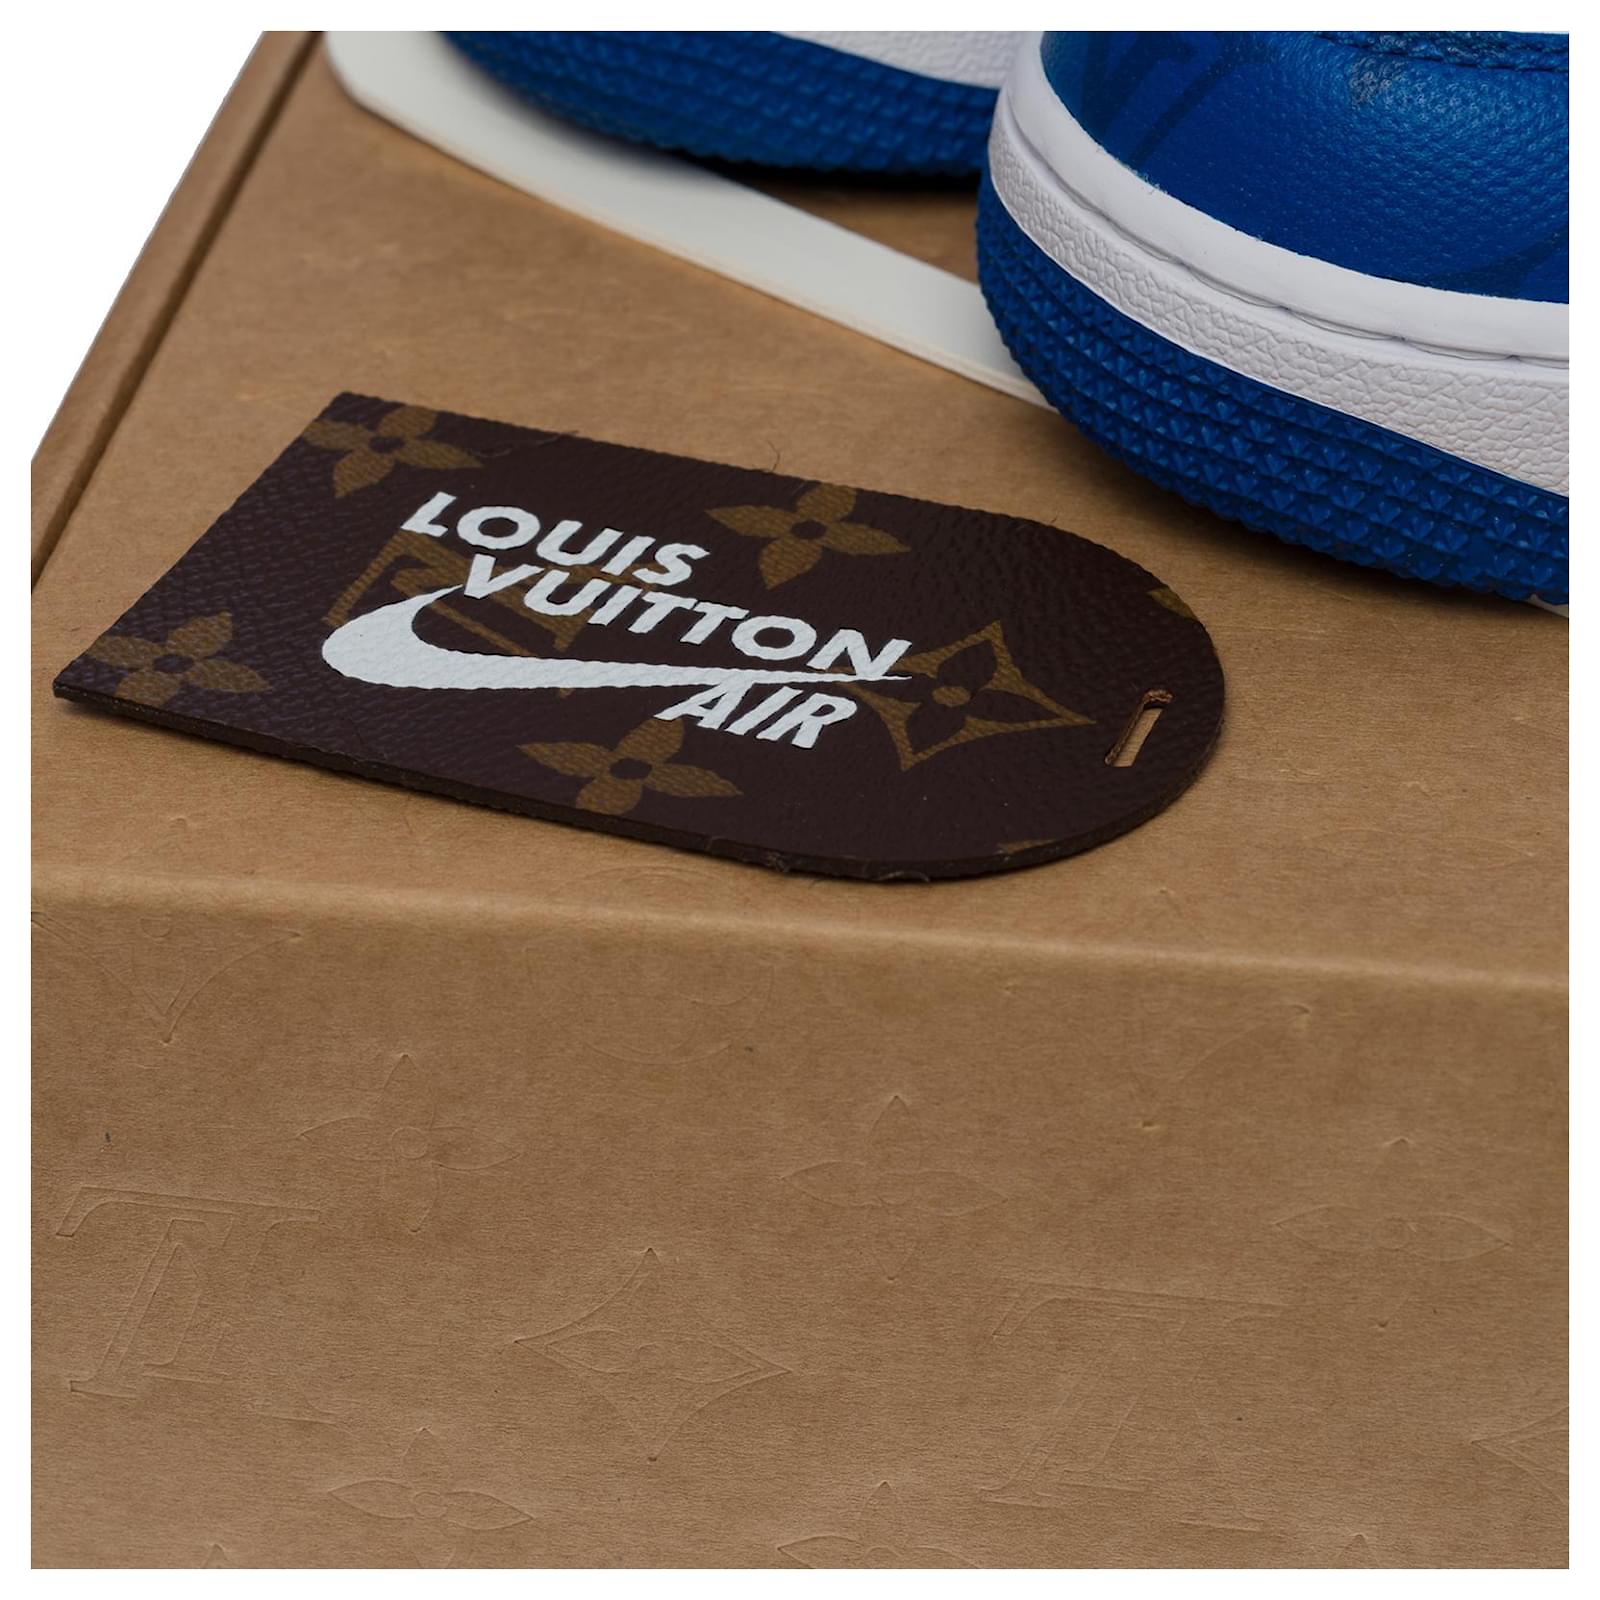 ULTRA LIMITED - Louis Vuitton x Nike Air Force 1 “Team Royale